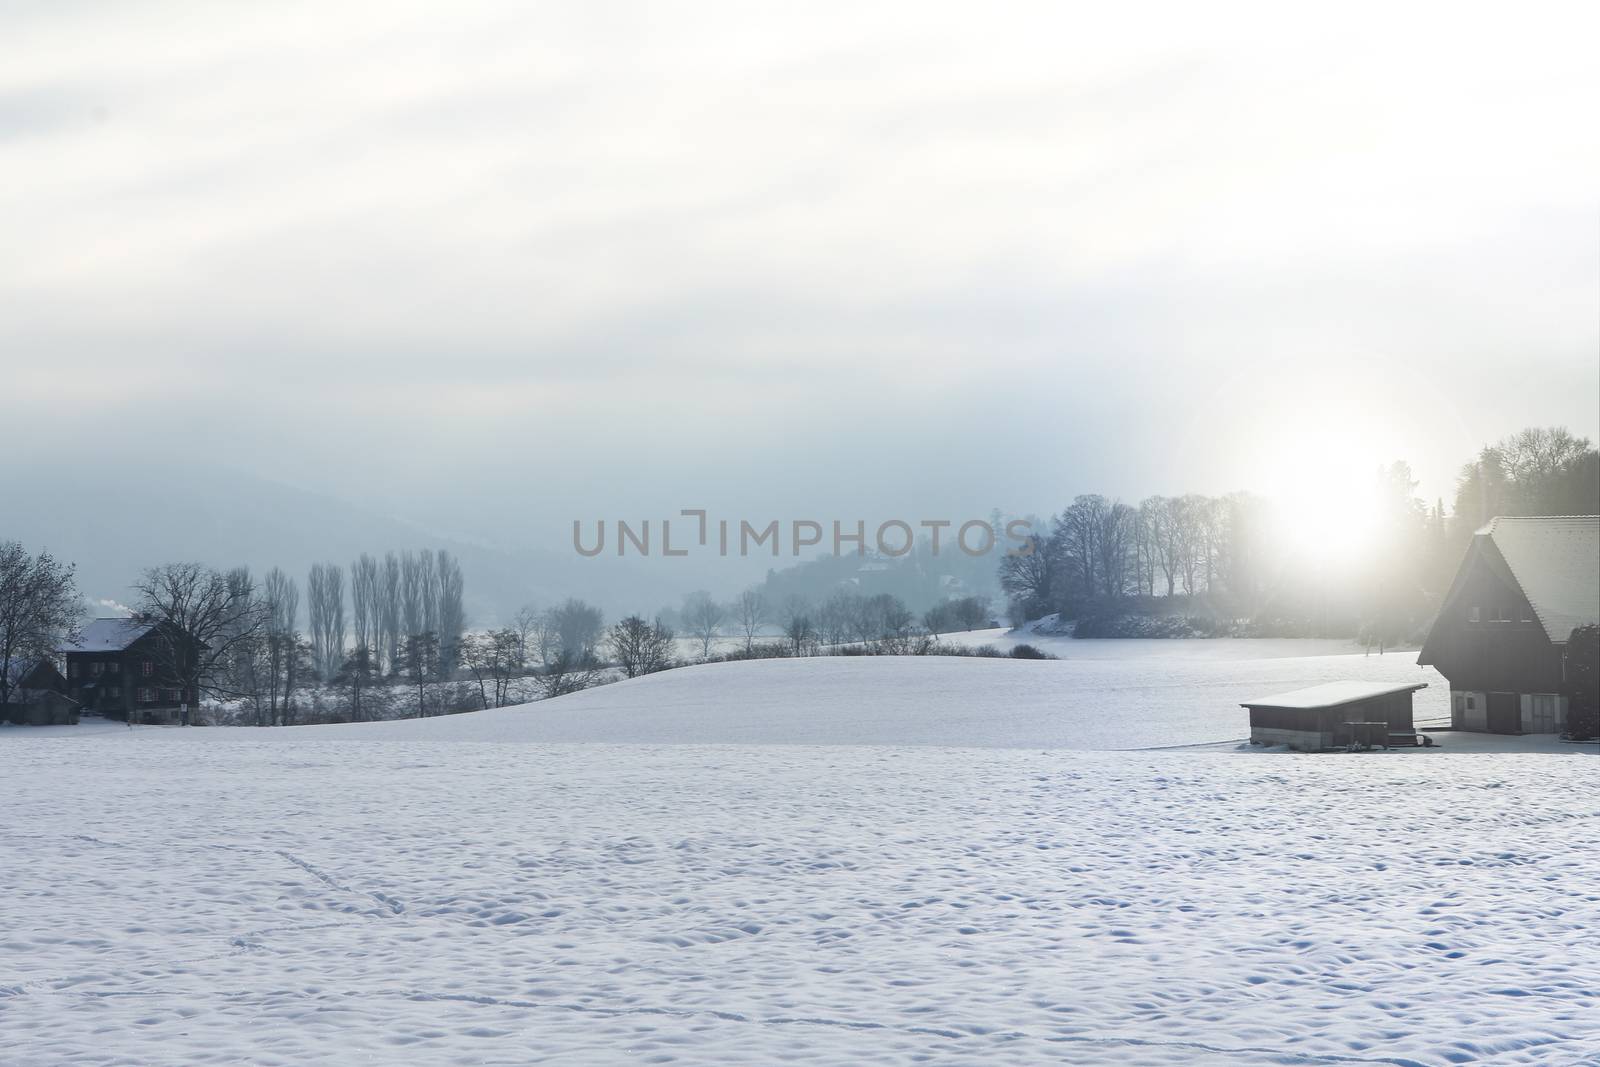 Winter landscape early morning after a light snowfall in Zug, by PeterHofstetter